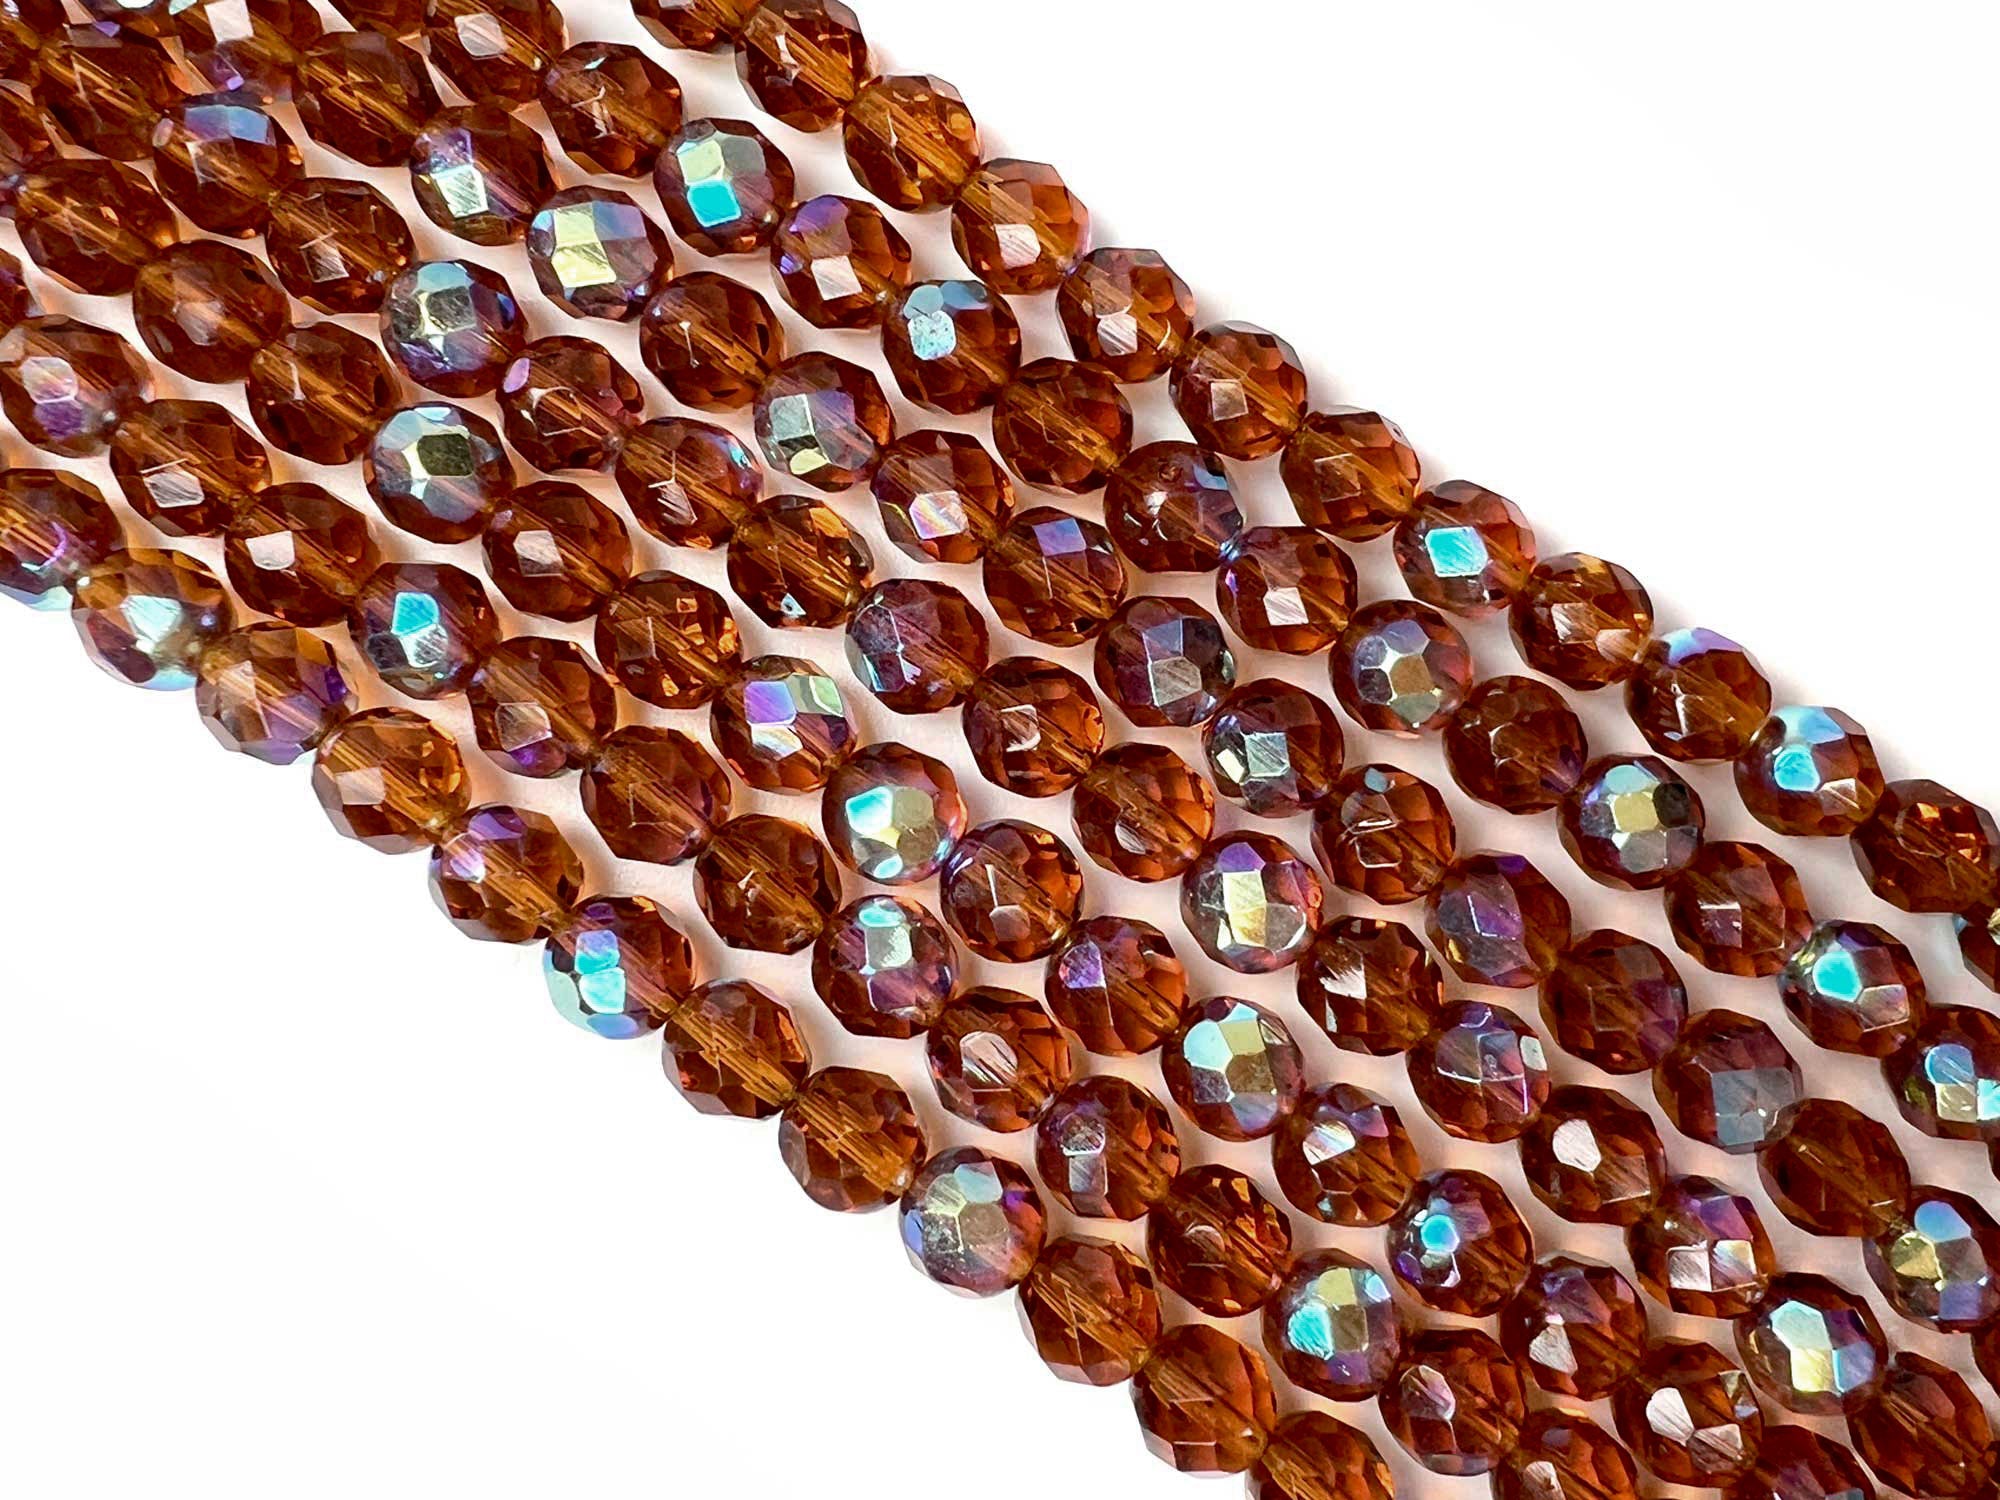 Medium Topaz AB coated, Czech Fire Polished Round Faceted Glass Beads, 16 inch strands, medium brown with Aurora Borealis coating, 3mm, 4mm, 6mm, 8mm